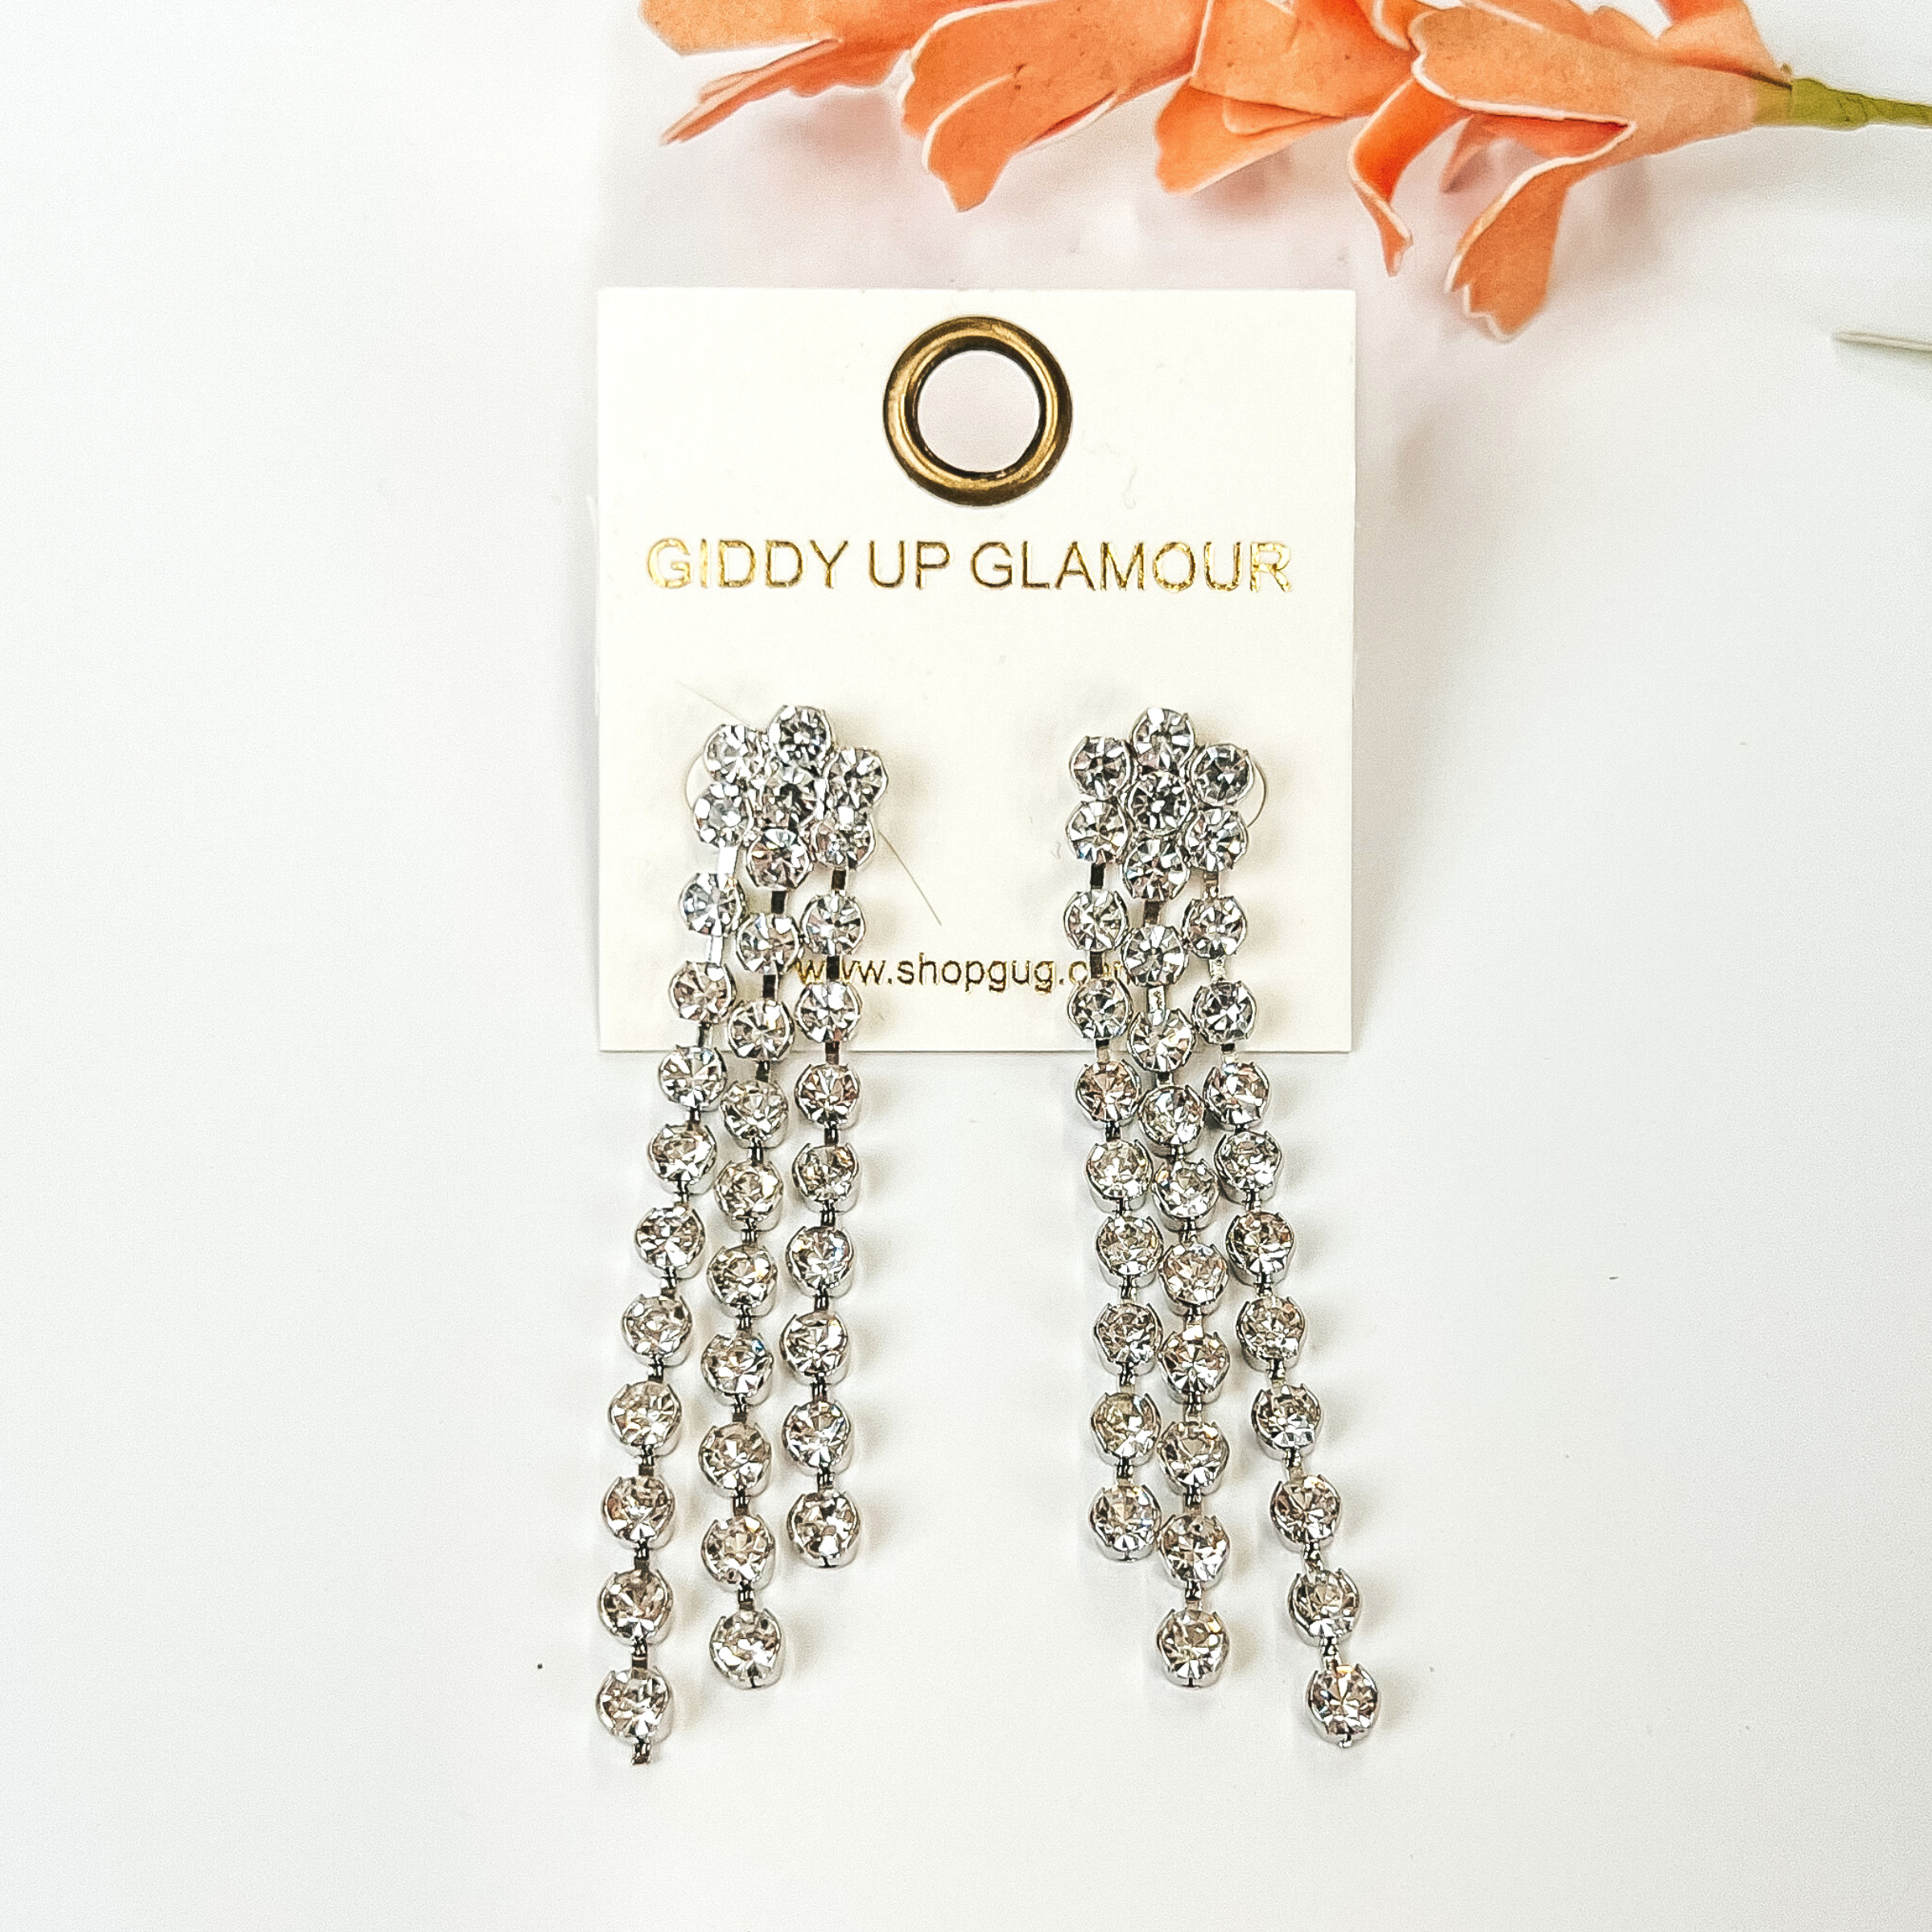 Clear crystal tassel earrings with a silver backing. These earrings are pictured on a white background with an orange flower above the earrings.